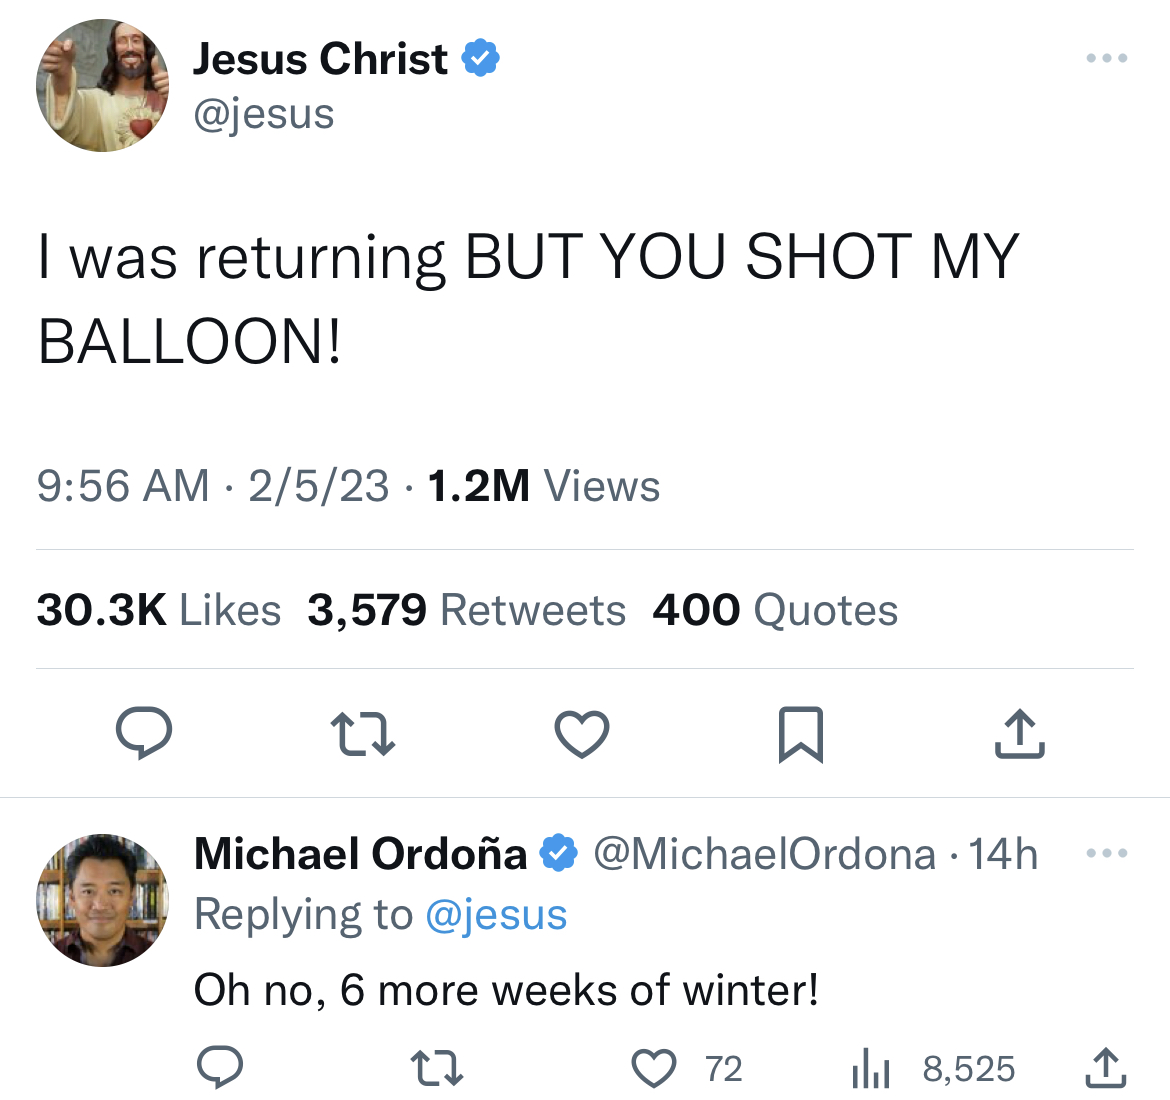 savage and absurd tweets - screenshot - Jesus Christ I was returning But You Shot My Balloon! 2523 1.2M Views 3,579 400 Quotes 27 Michael Ordoa 14h Oh no, 6 more weeks of winter! 27 72 8,525